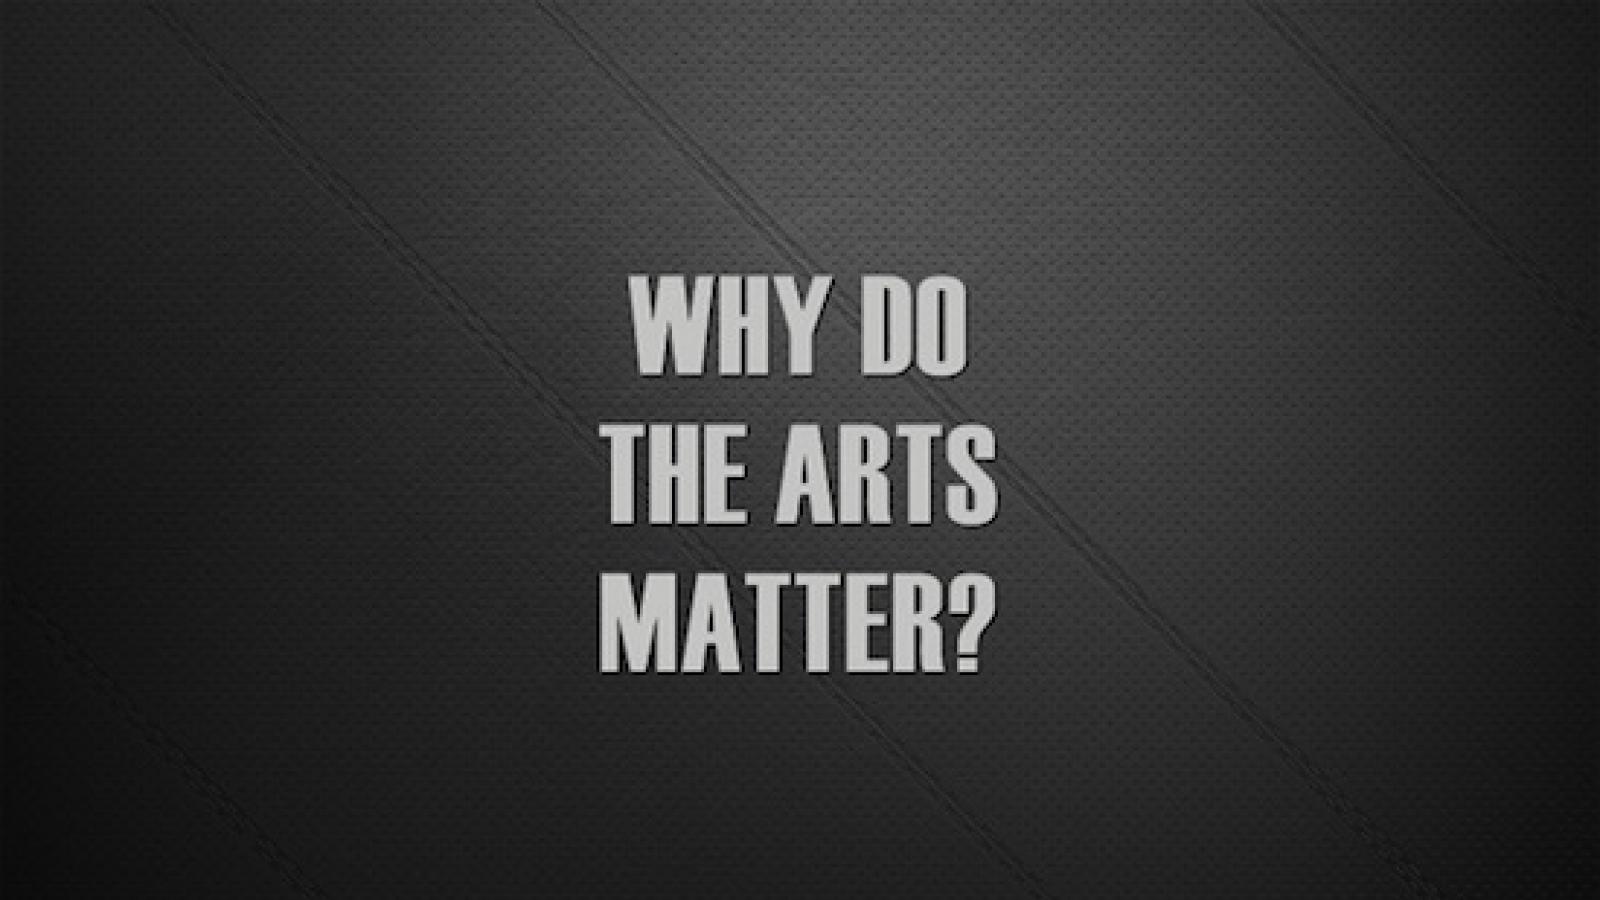 Grey text that says "Why do the arts matter" across a black background